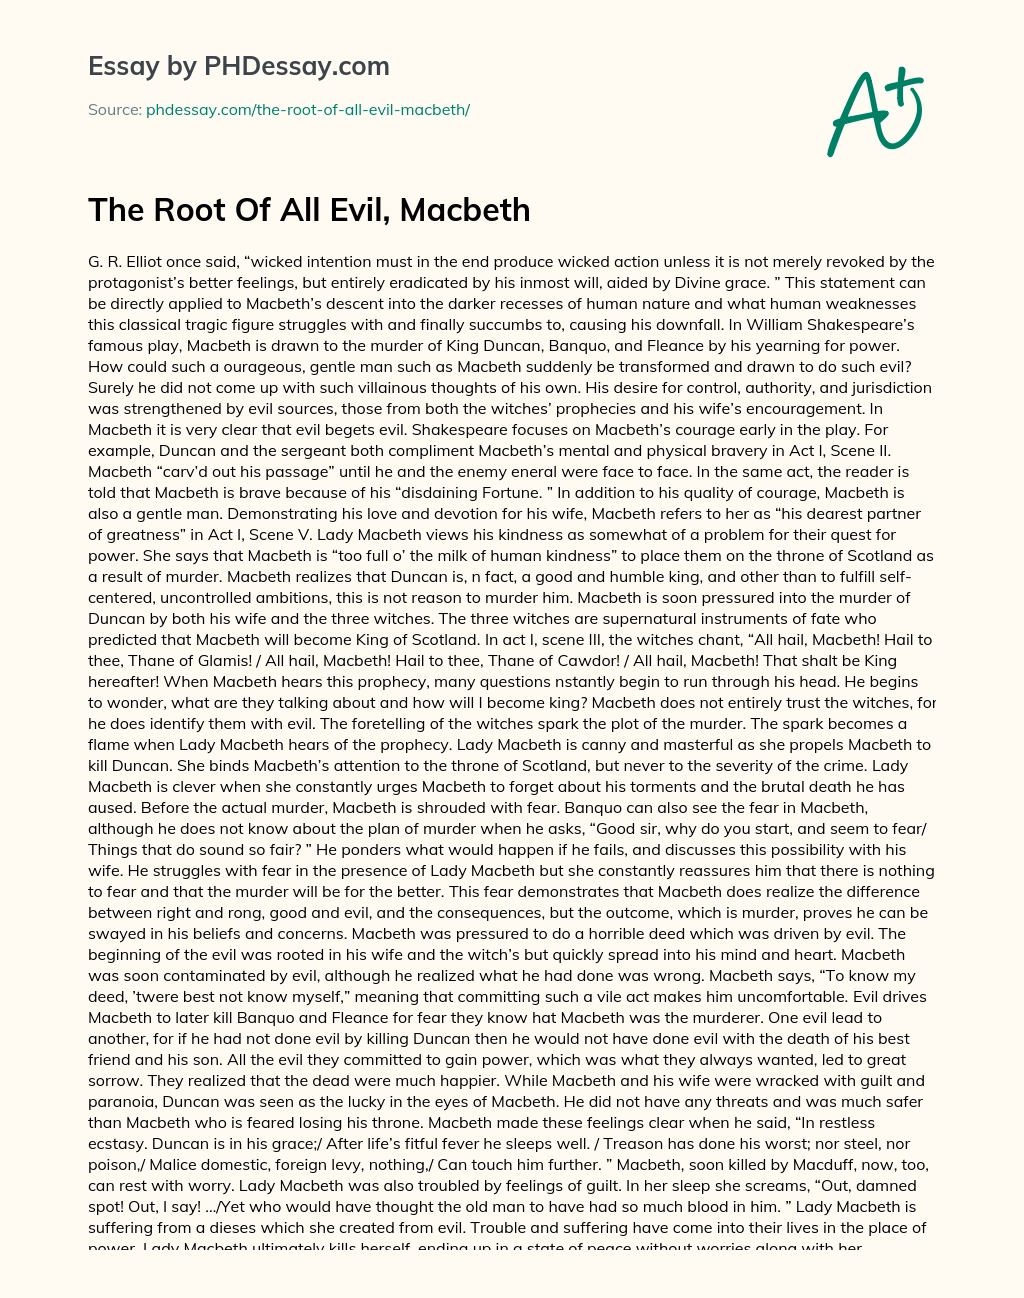 The Root Of All Evil, Macbeth essay